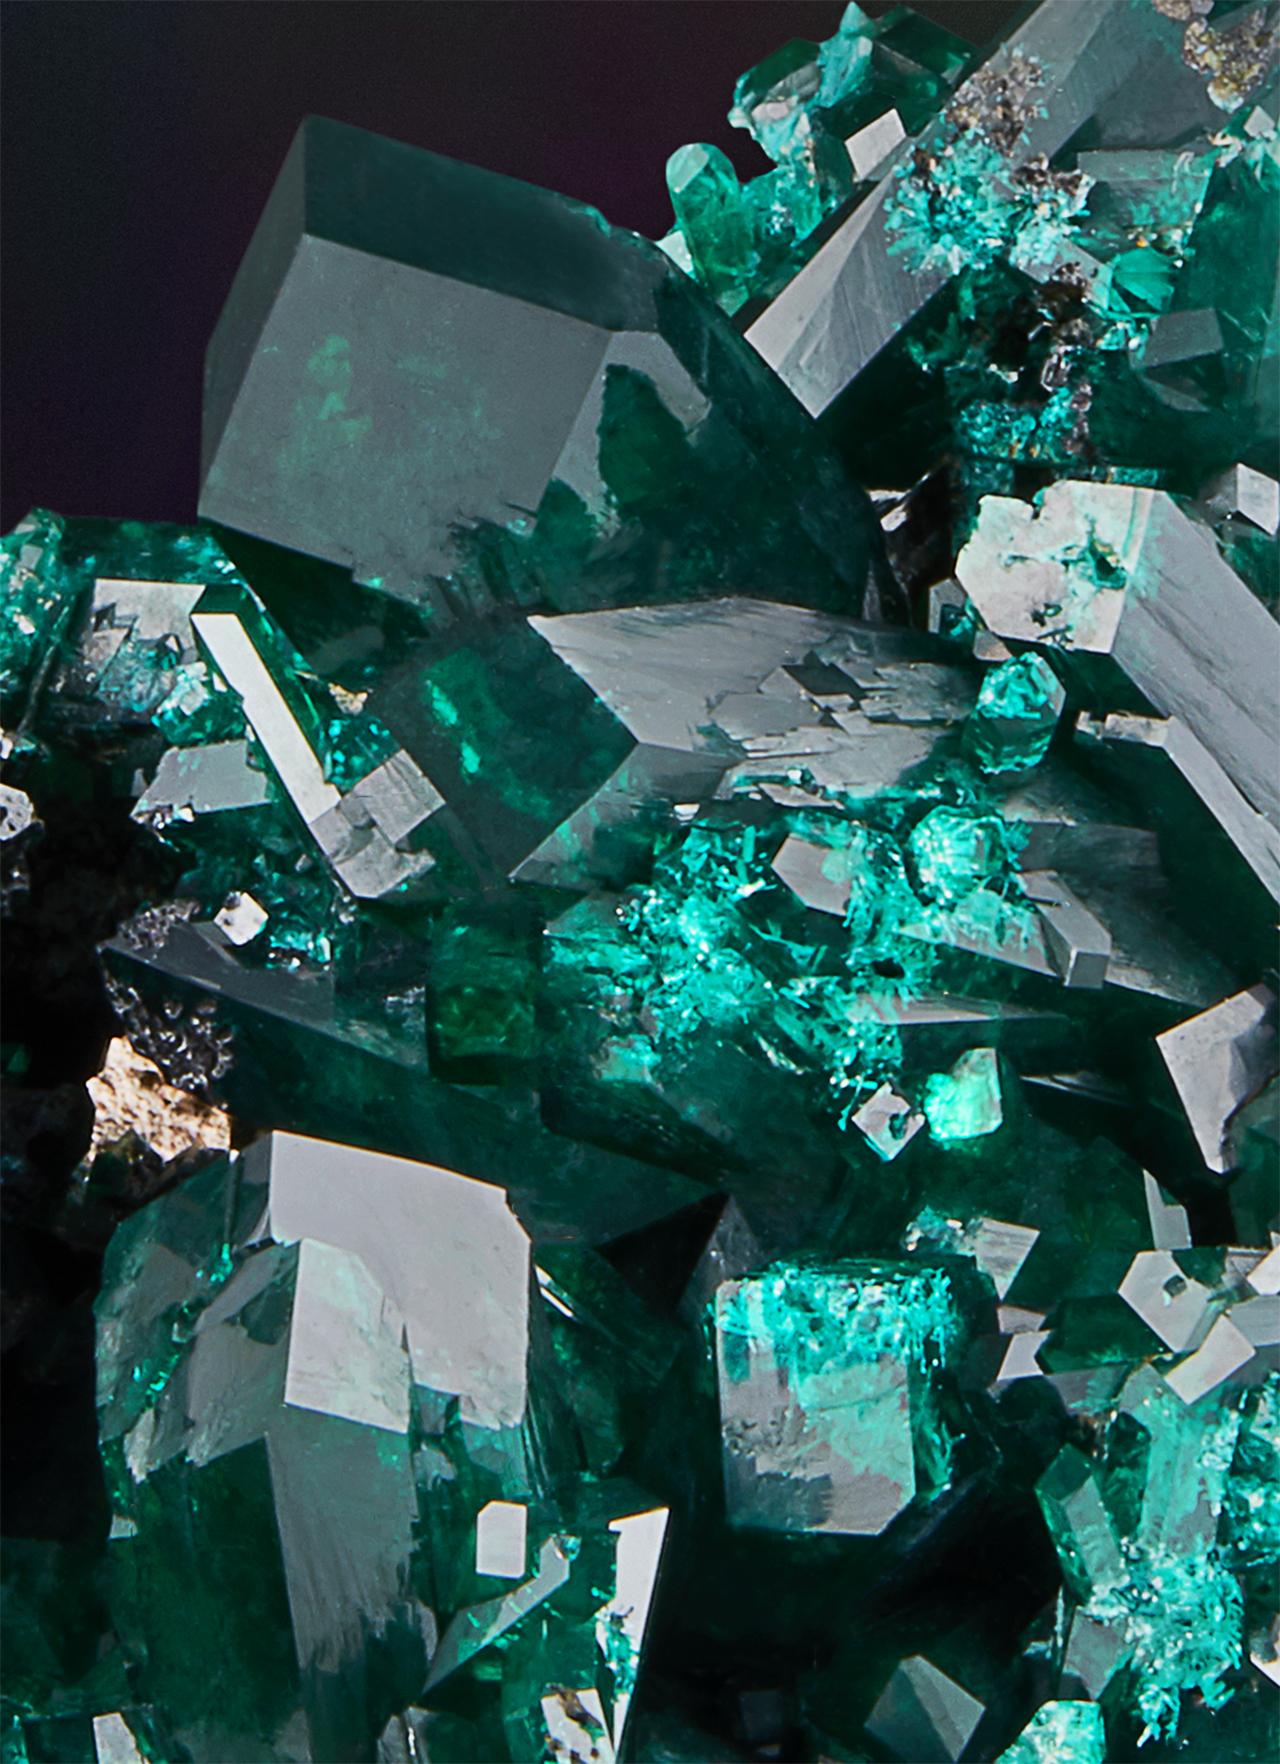 Dioptase, Omaue Mine, Kaokoveld Plateau, Kunene Region, Namibia

Measures: 9.5 cm tall x 9.9 cm wide

Dioptase, once believed to be emerald when first encountered, is amongst the most vividly colored species. Large gem crystals, such as these,